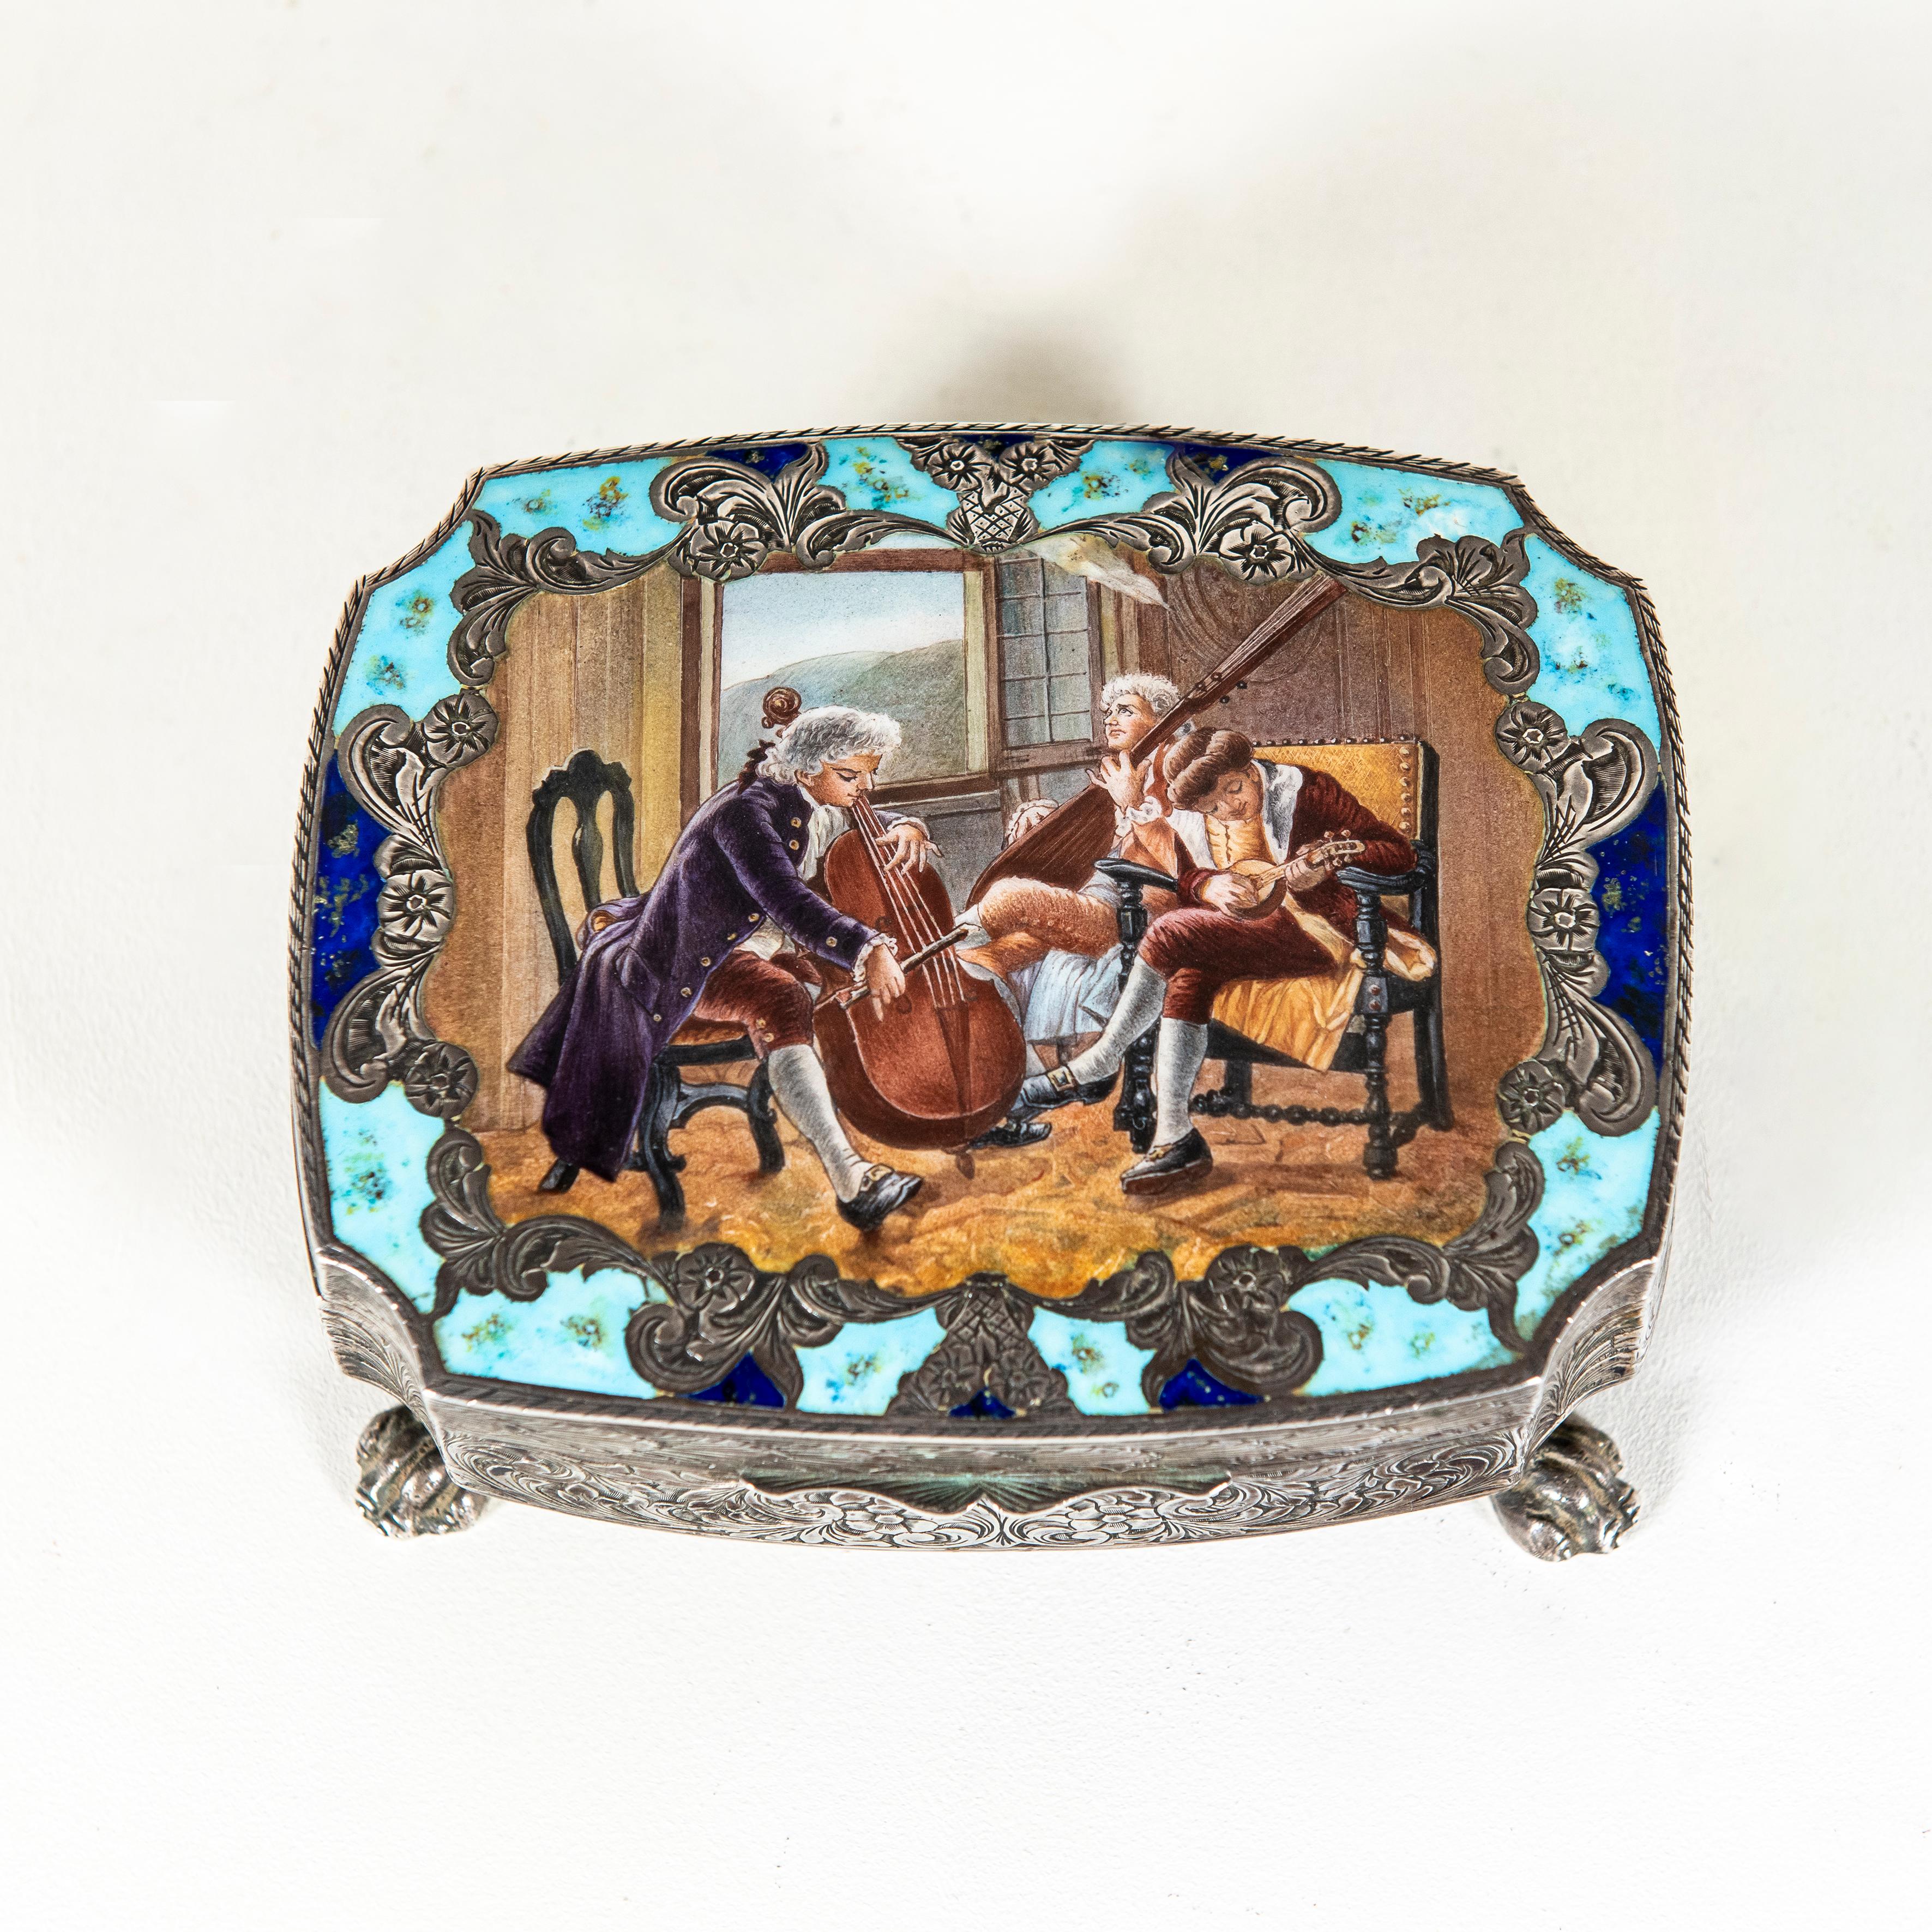 Silver 800 and enamel music box signed Fallaci Firenze. Italy, circa 1930.
Marked silver 800.
Machine signed 